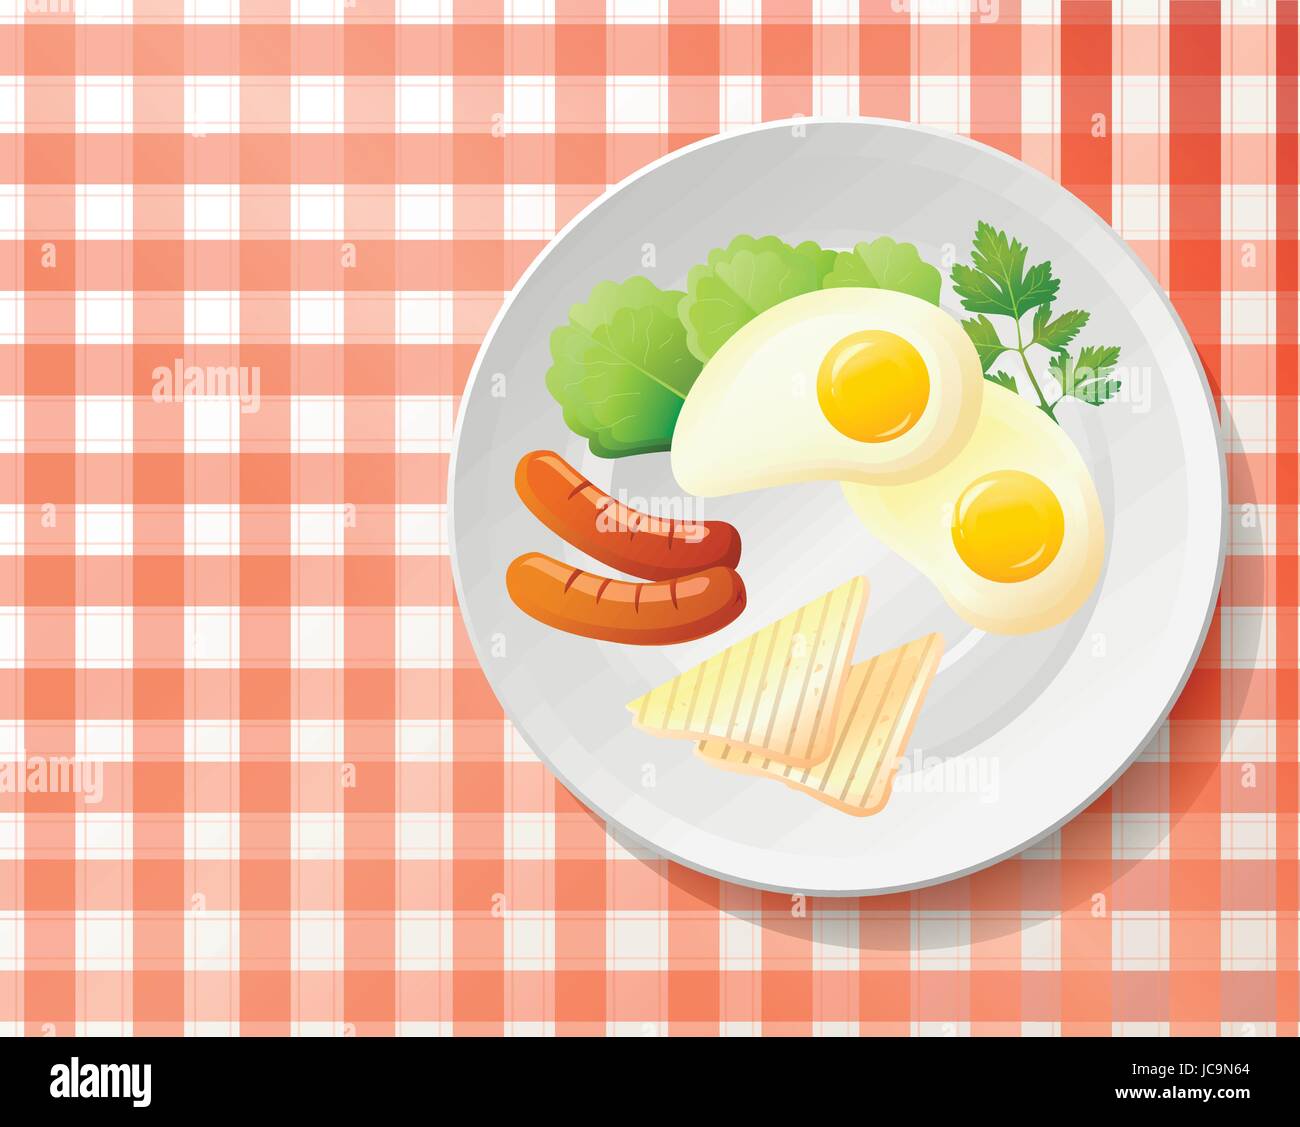 Fresh breakfast:fried egg,sausage,tasty toast,leaf salad lettuce,parsley on white plate.  English meal on checkered red & white tablecloth.Top view be Stock Vector